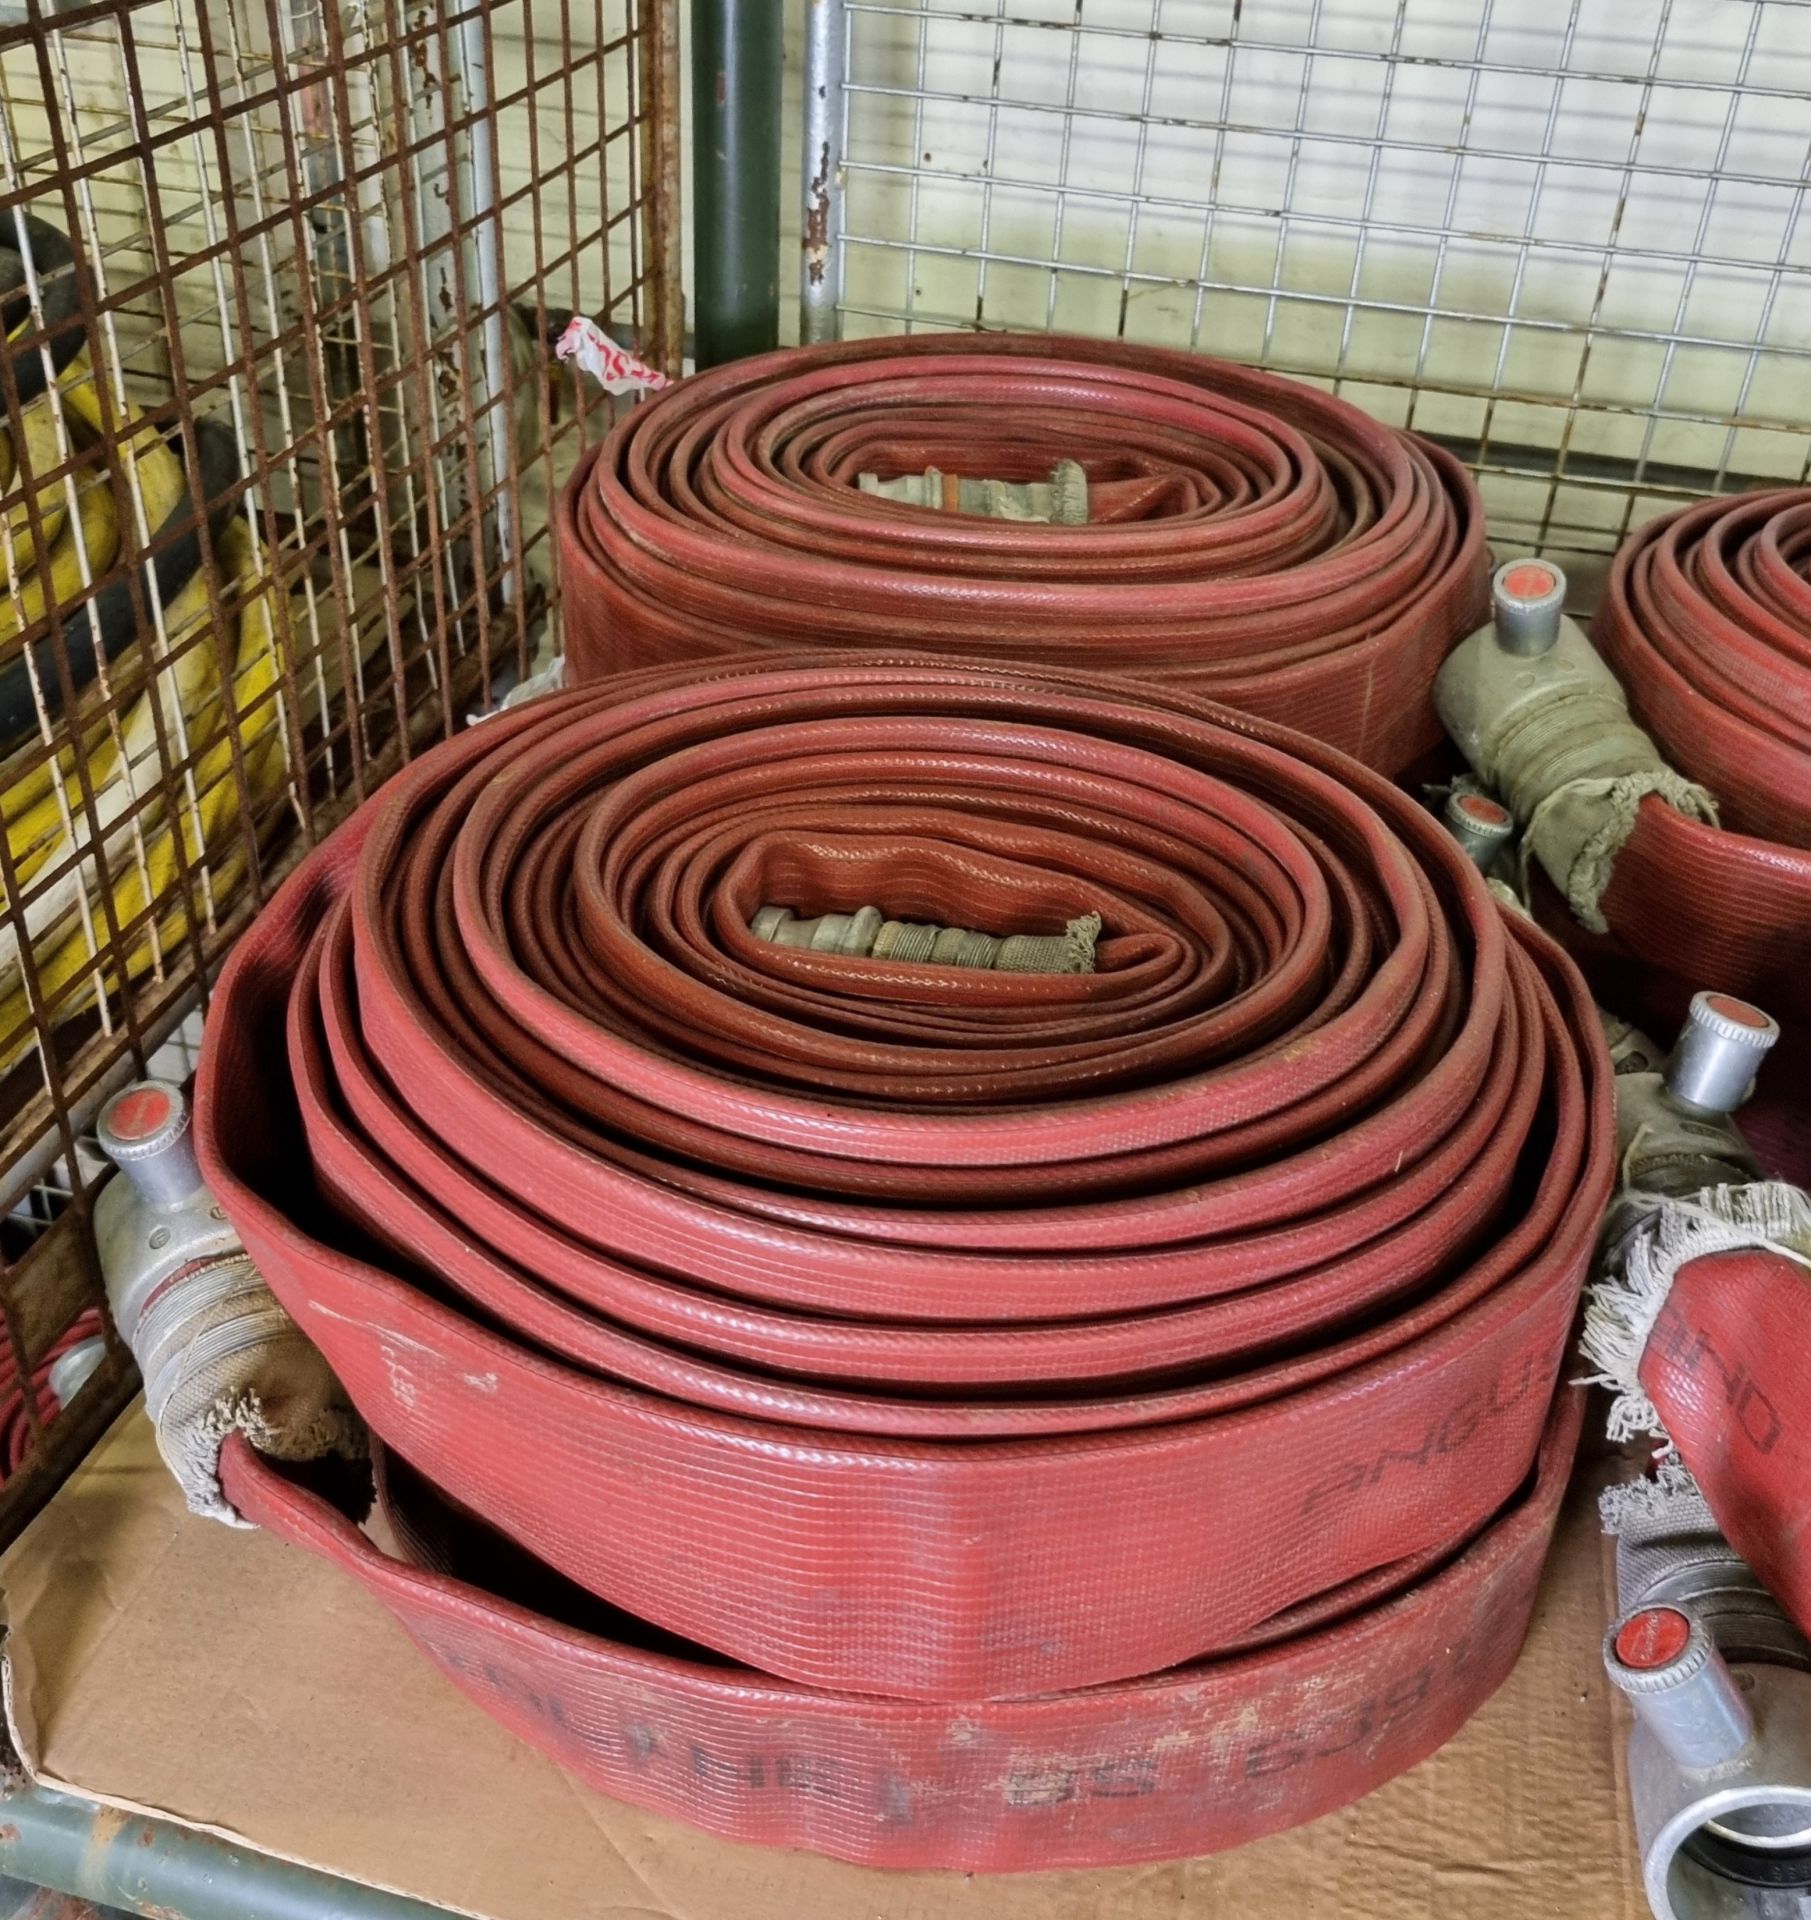 8x Angus Duraline 70mm lay flat hoses with couplings - approx 23 M in length - Image 4 of 5